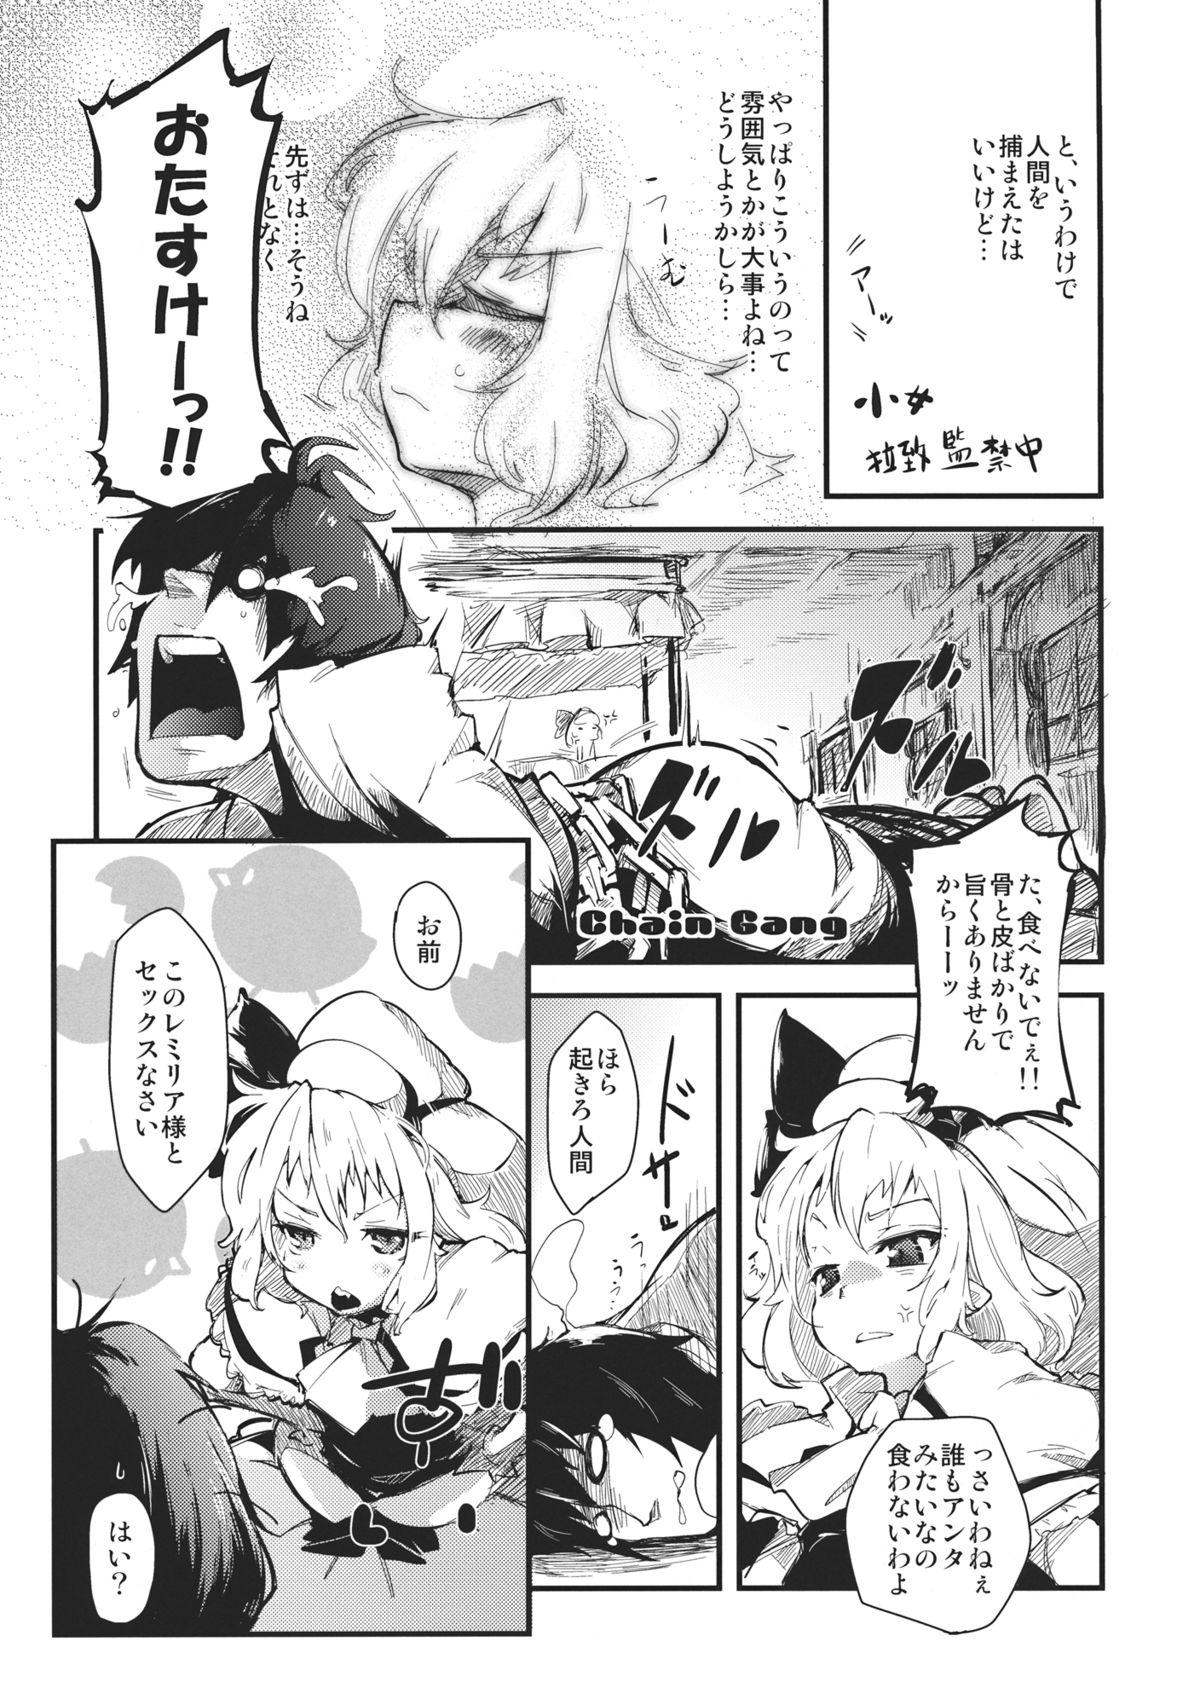 Sensual LolitaEmpress - Touhou project Private - Page 5